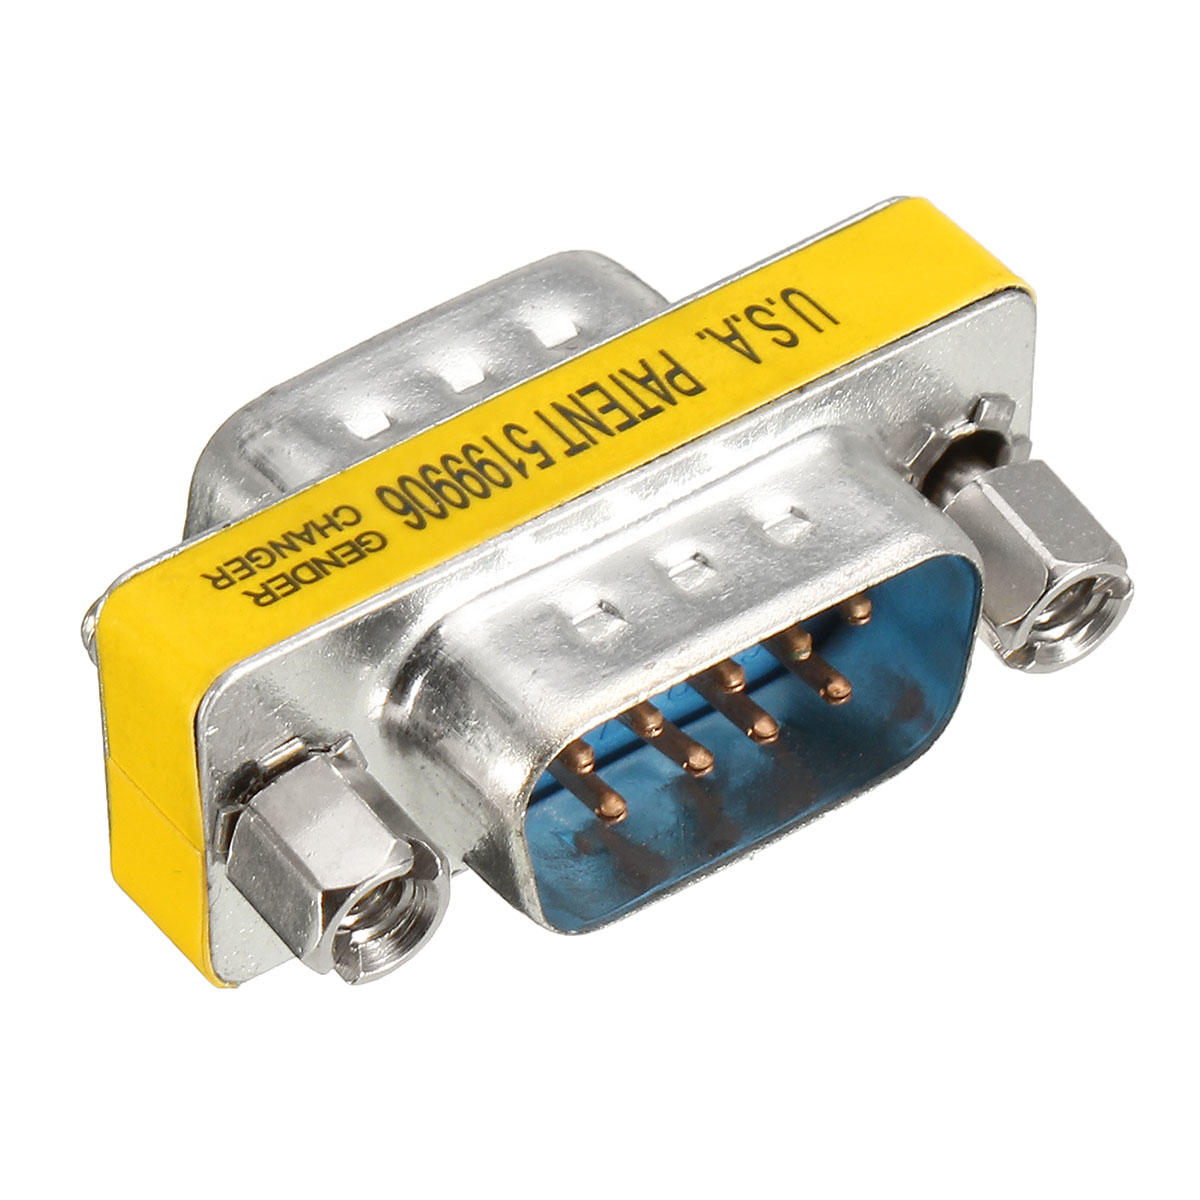 DB9 Serial Port Adapter Connector RS232 Converter Head - US$1.46